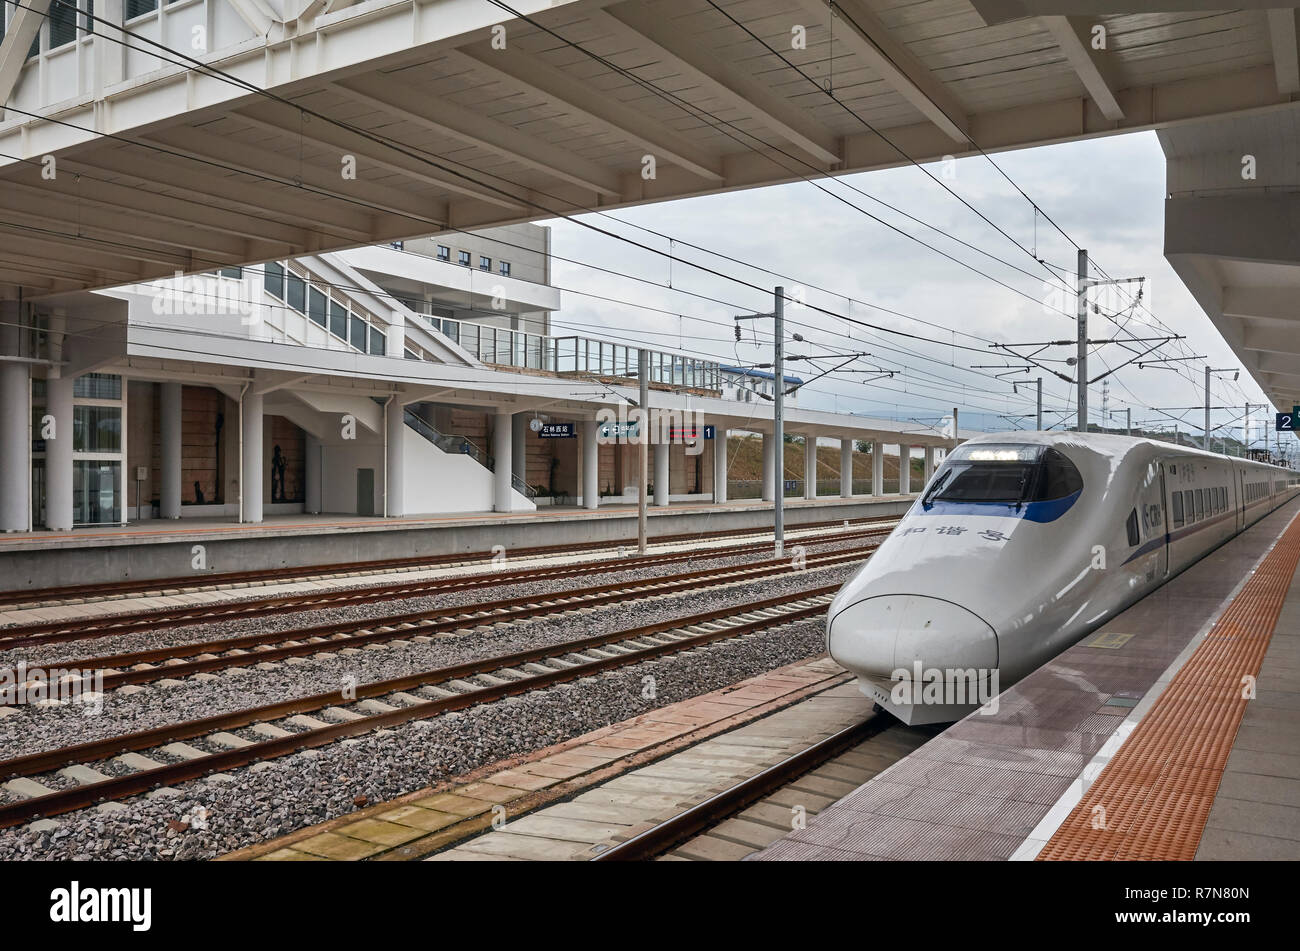 Shilin, China - September 21, 2017: High-speed train departs from Shilin station. Stock Photo